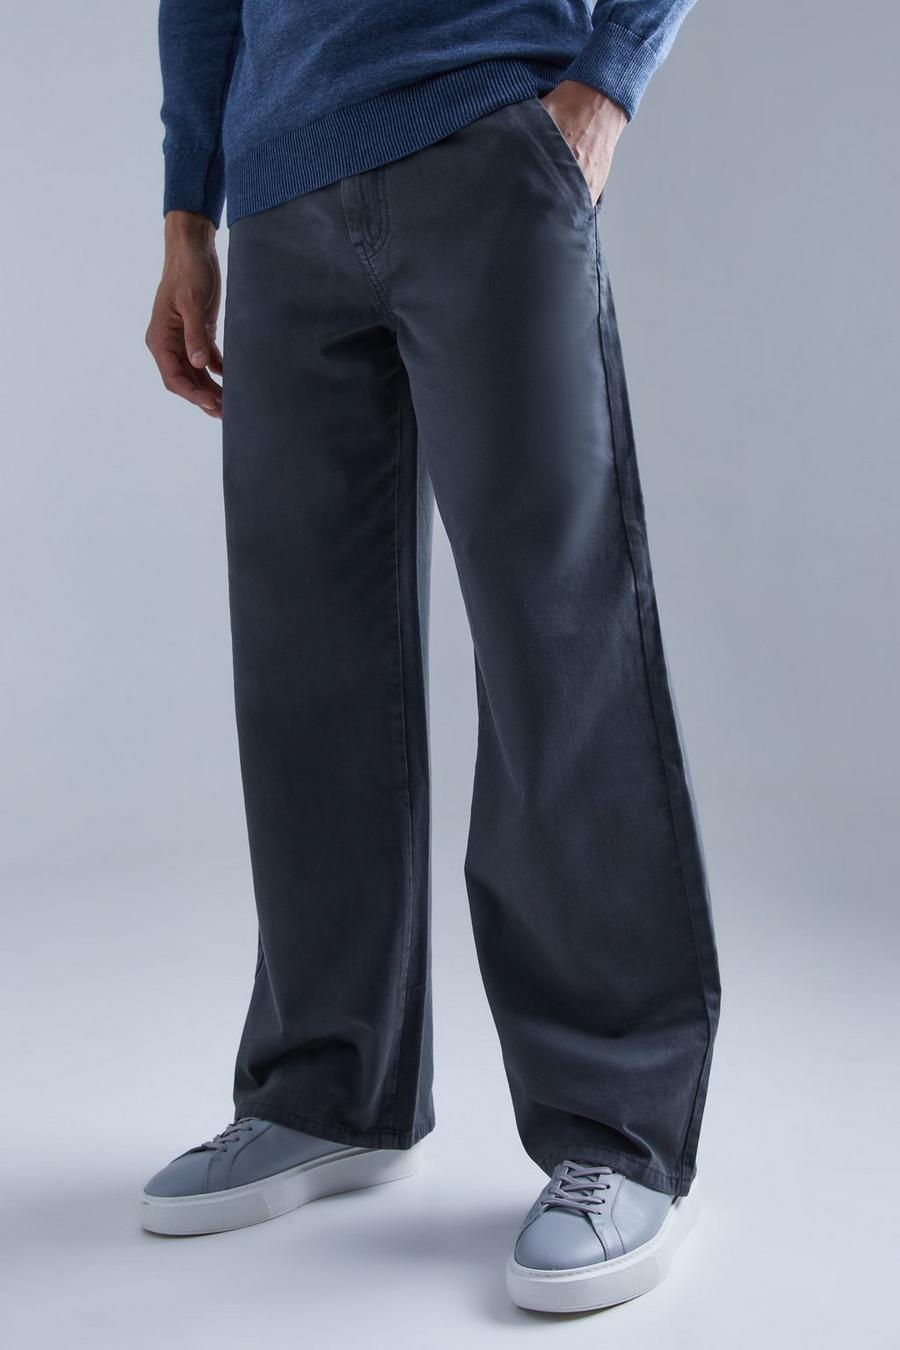 Charcoal grey Wide Fit Chino Trouser